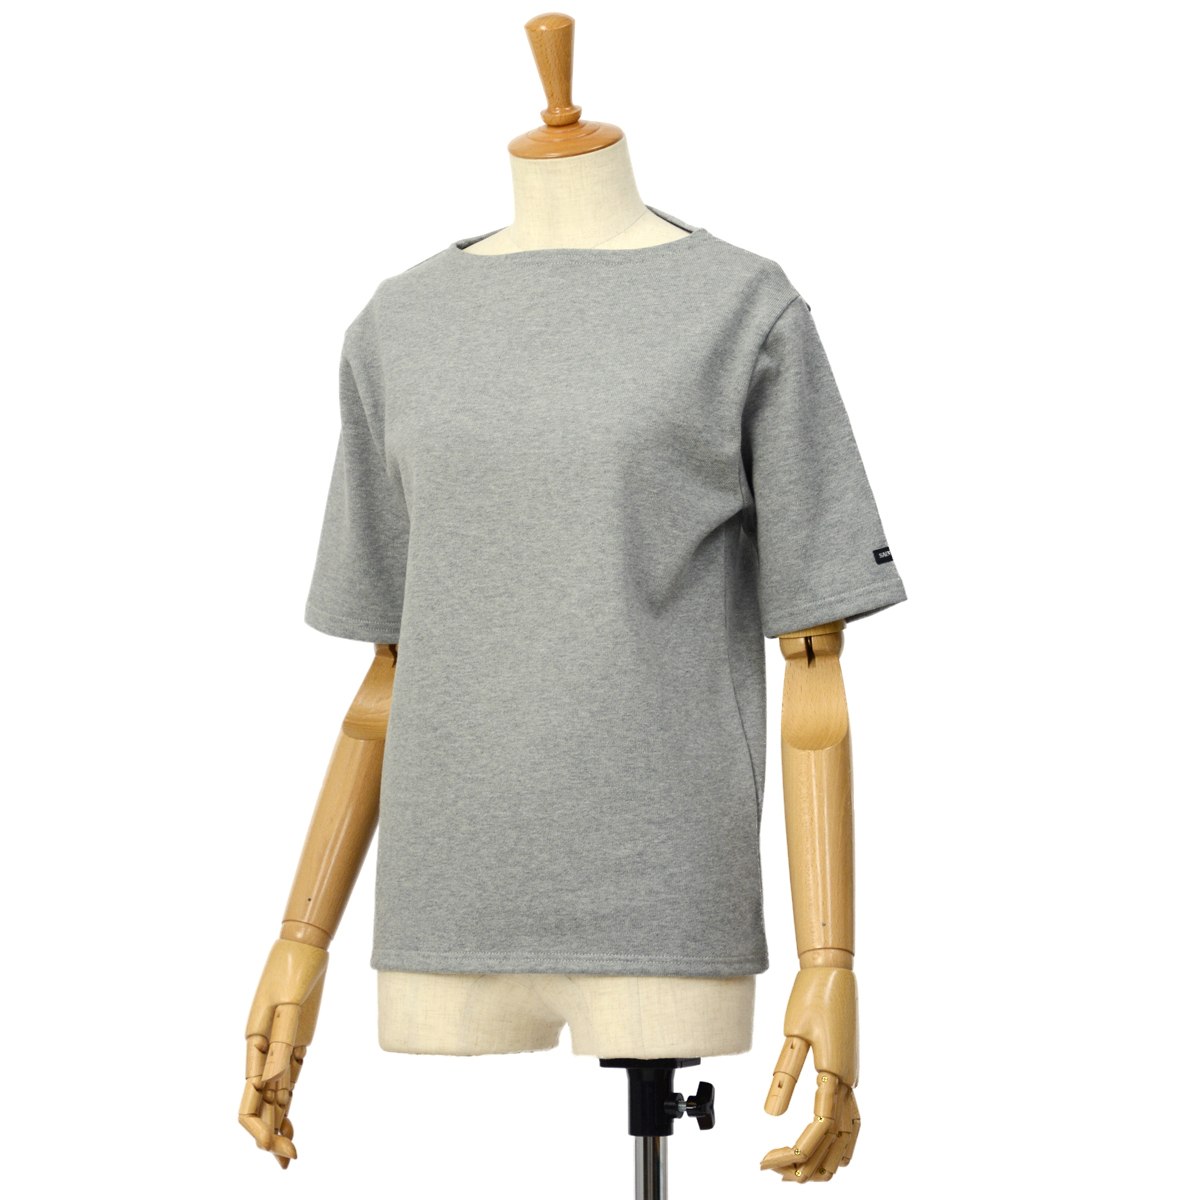 【50%OFF】【size T0】SAINT JAMES【セントジェームス】ボートネック半袖カットソー ウエッソン OUESSANT  SHORT SLEEVE SHIRTS GRIS グレー